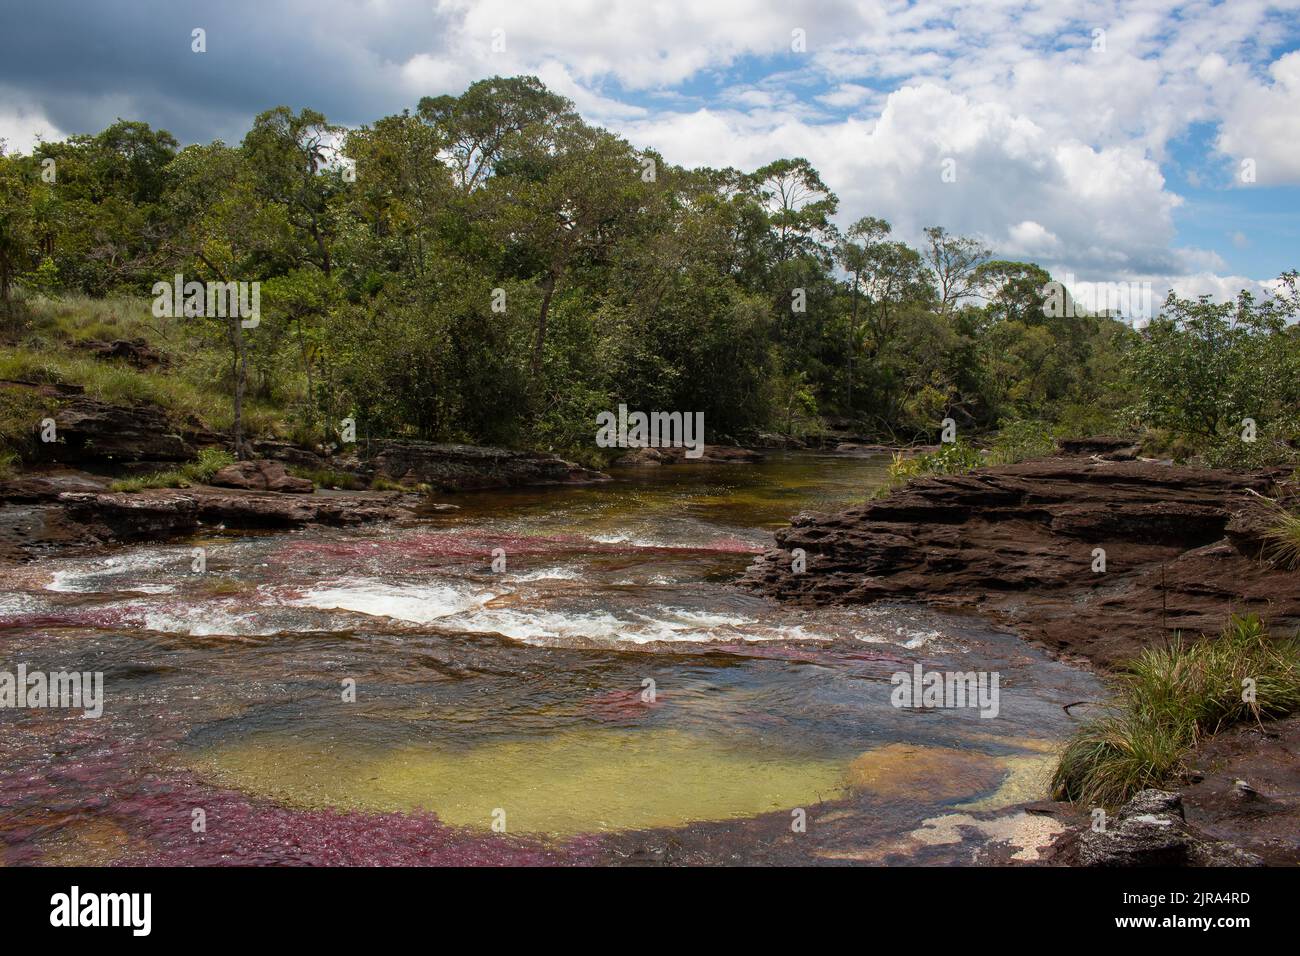 A view of the Cano Cristales, known as the Rainbow River, in the Serrania de La Macarena National Park in Colombia Stock Photo